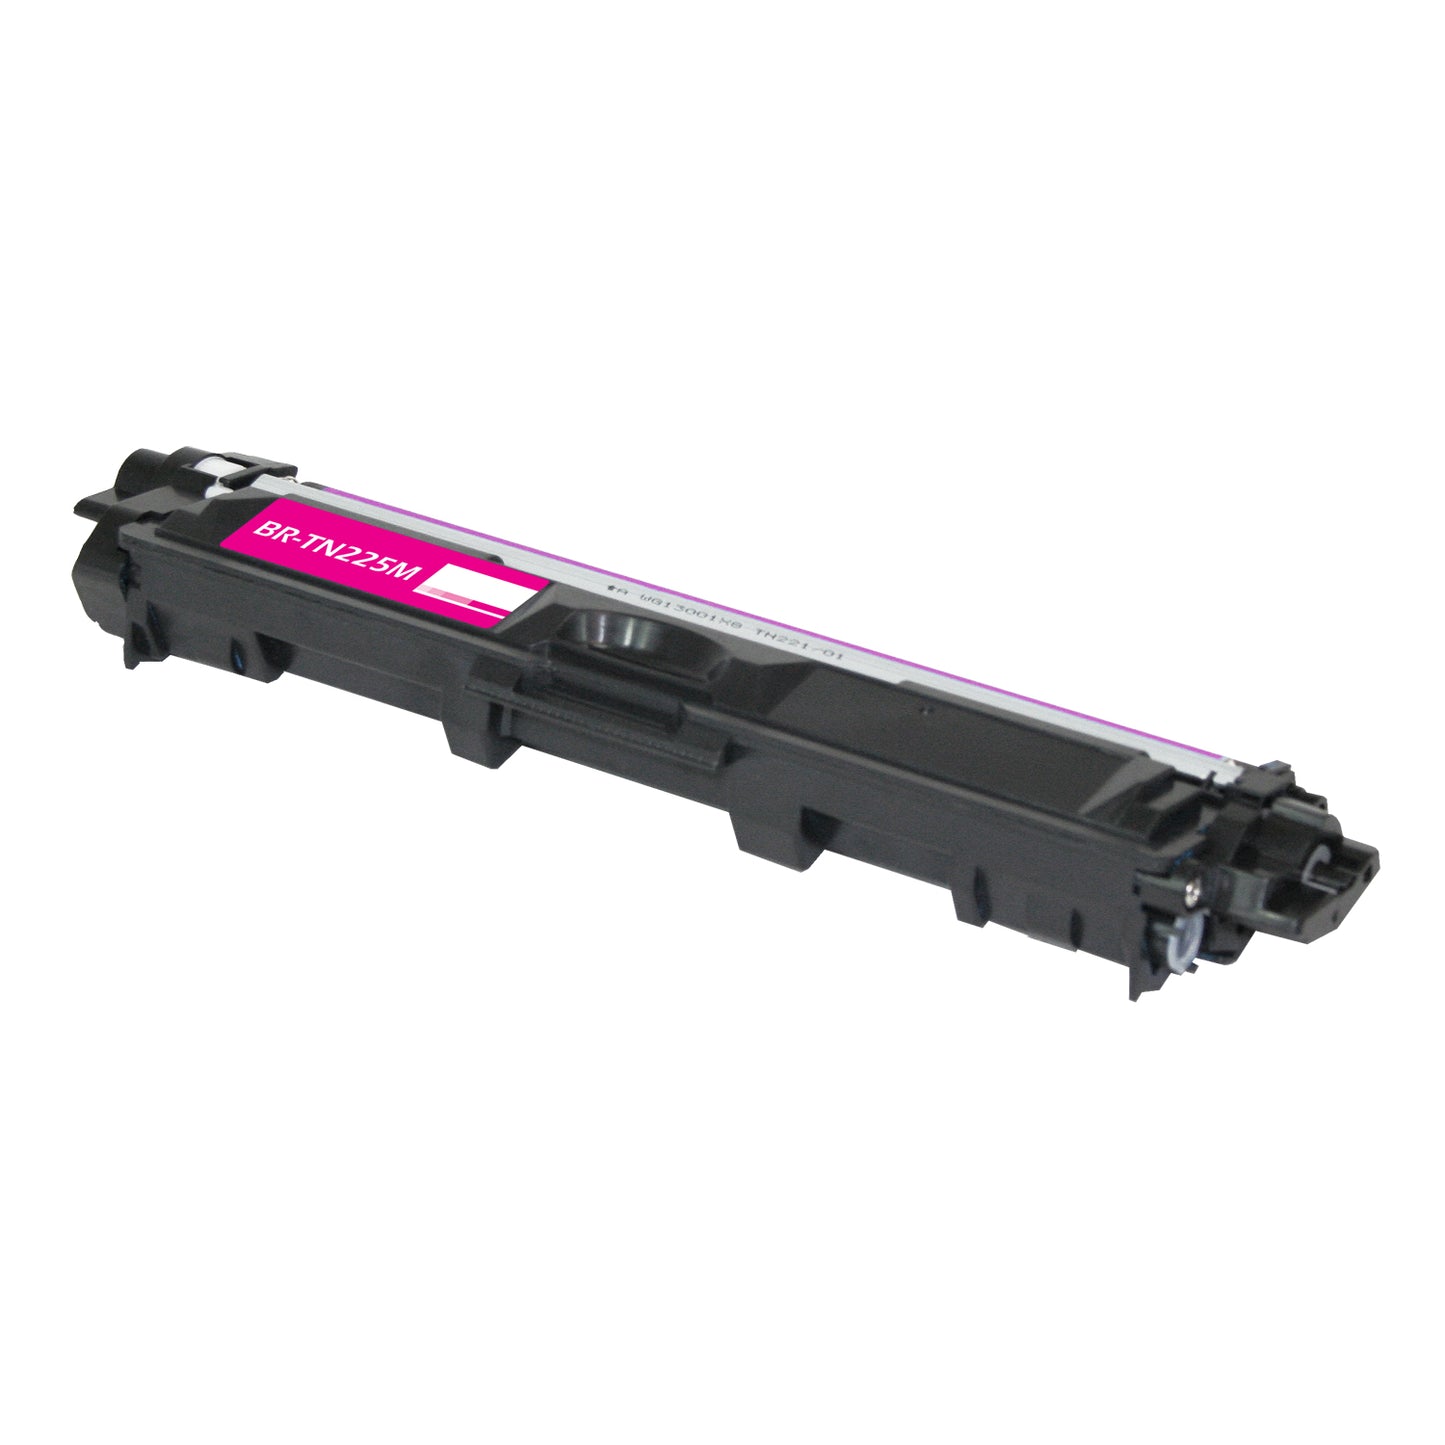 TN225 (TN225M) Magenta Toner Cartridge for DCP-9015 9020, HL-3140 3150 3170 3180, MFC-9130 9330 9340, Replaces TN221M, 2,200 High Page Yield